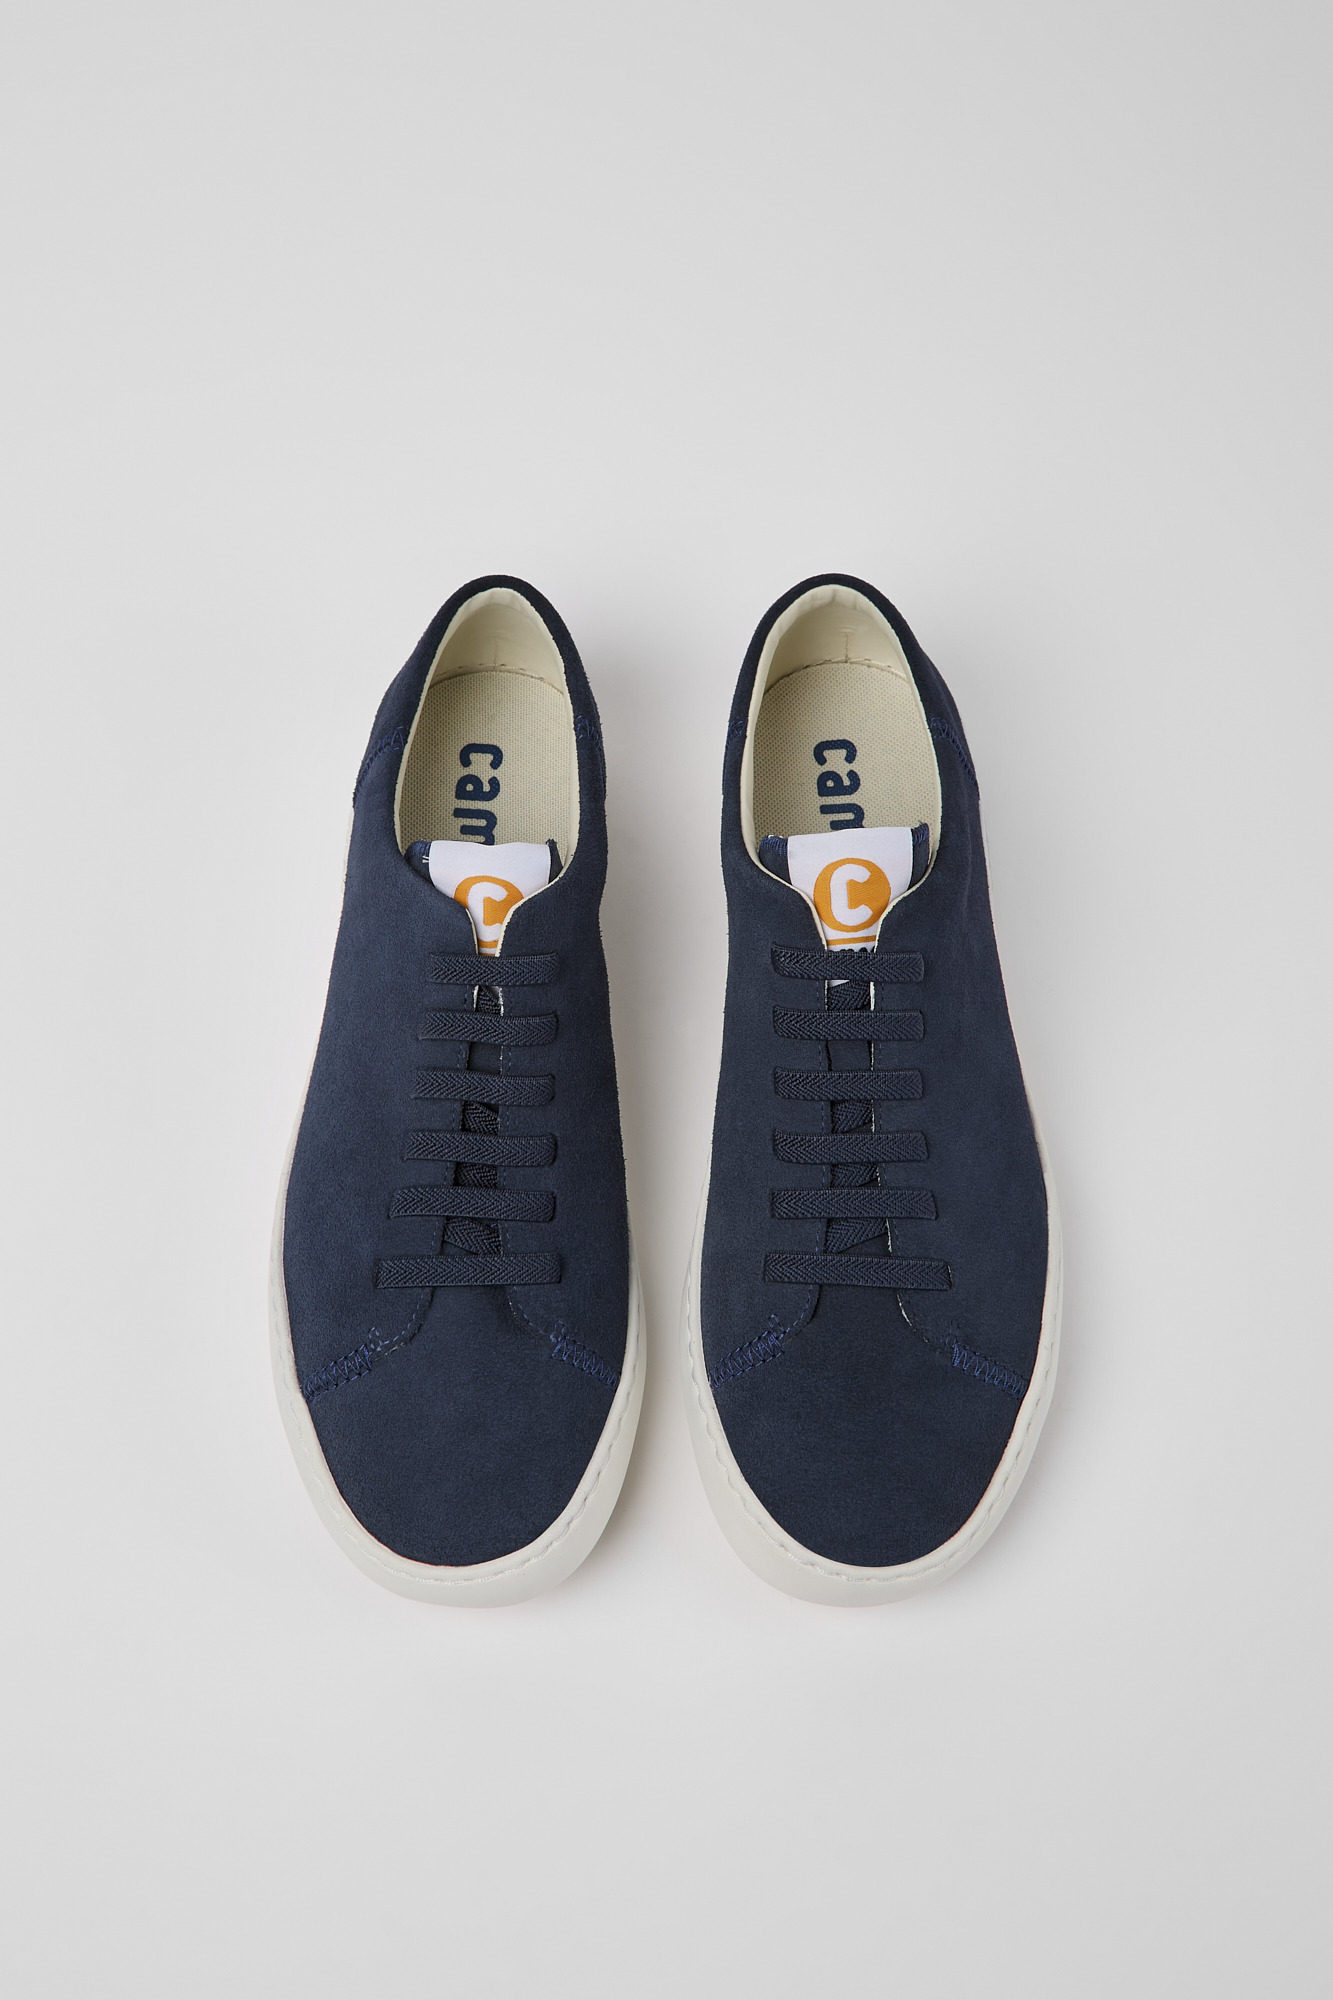 Shoes for Men - Fall/Winter Collection - Camper Canada